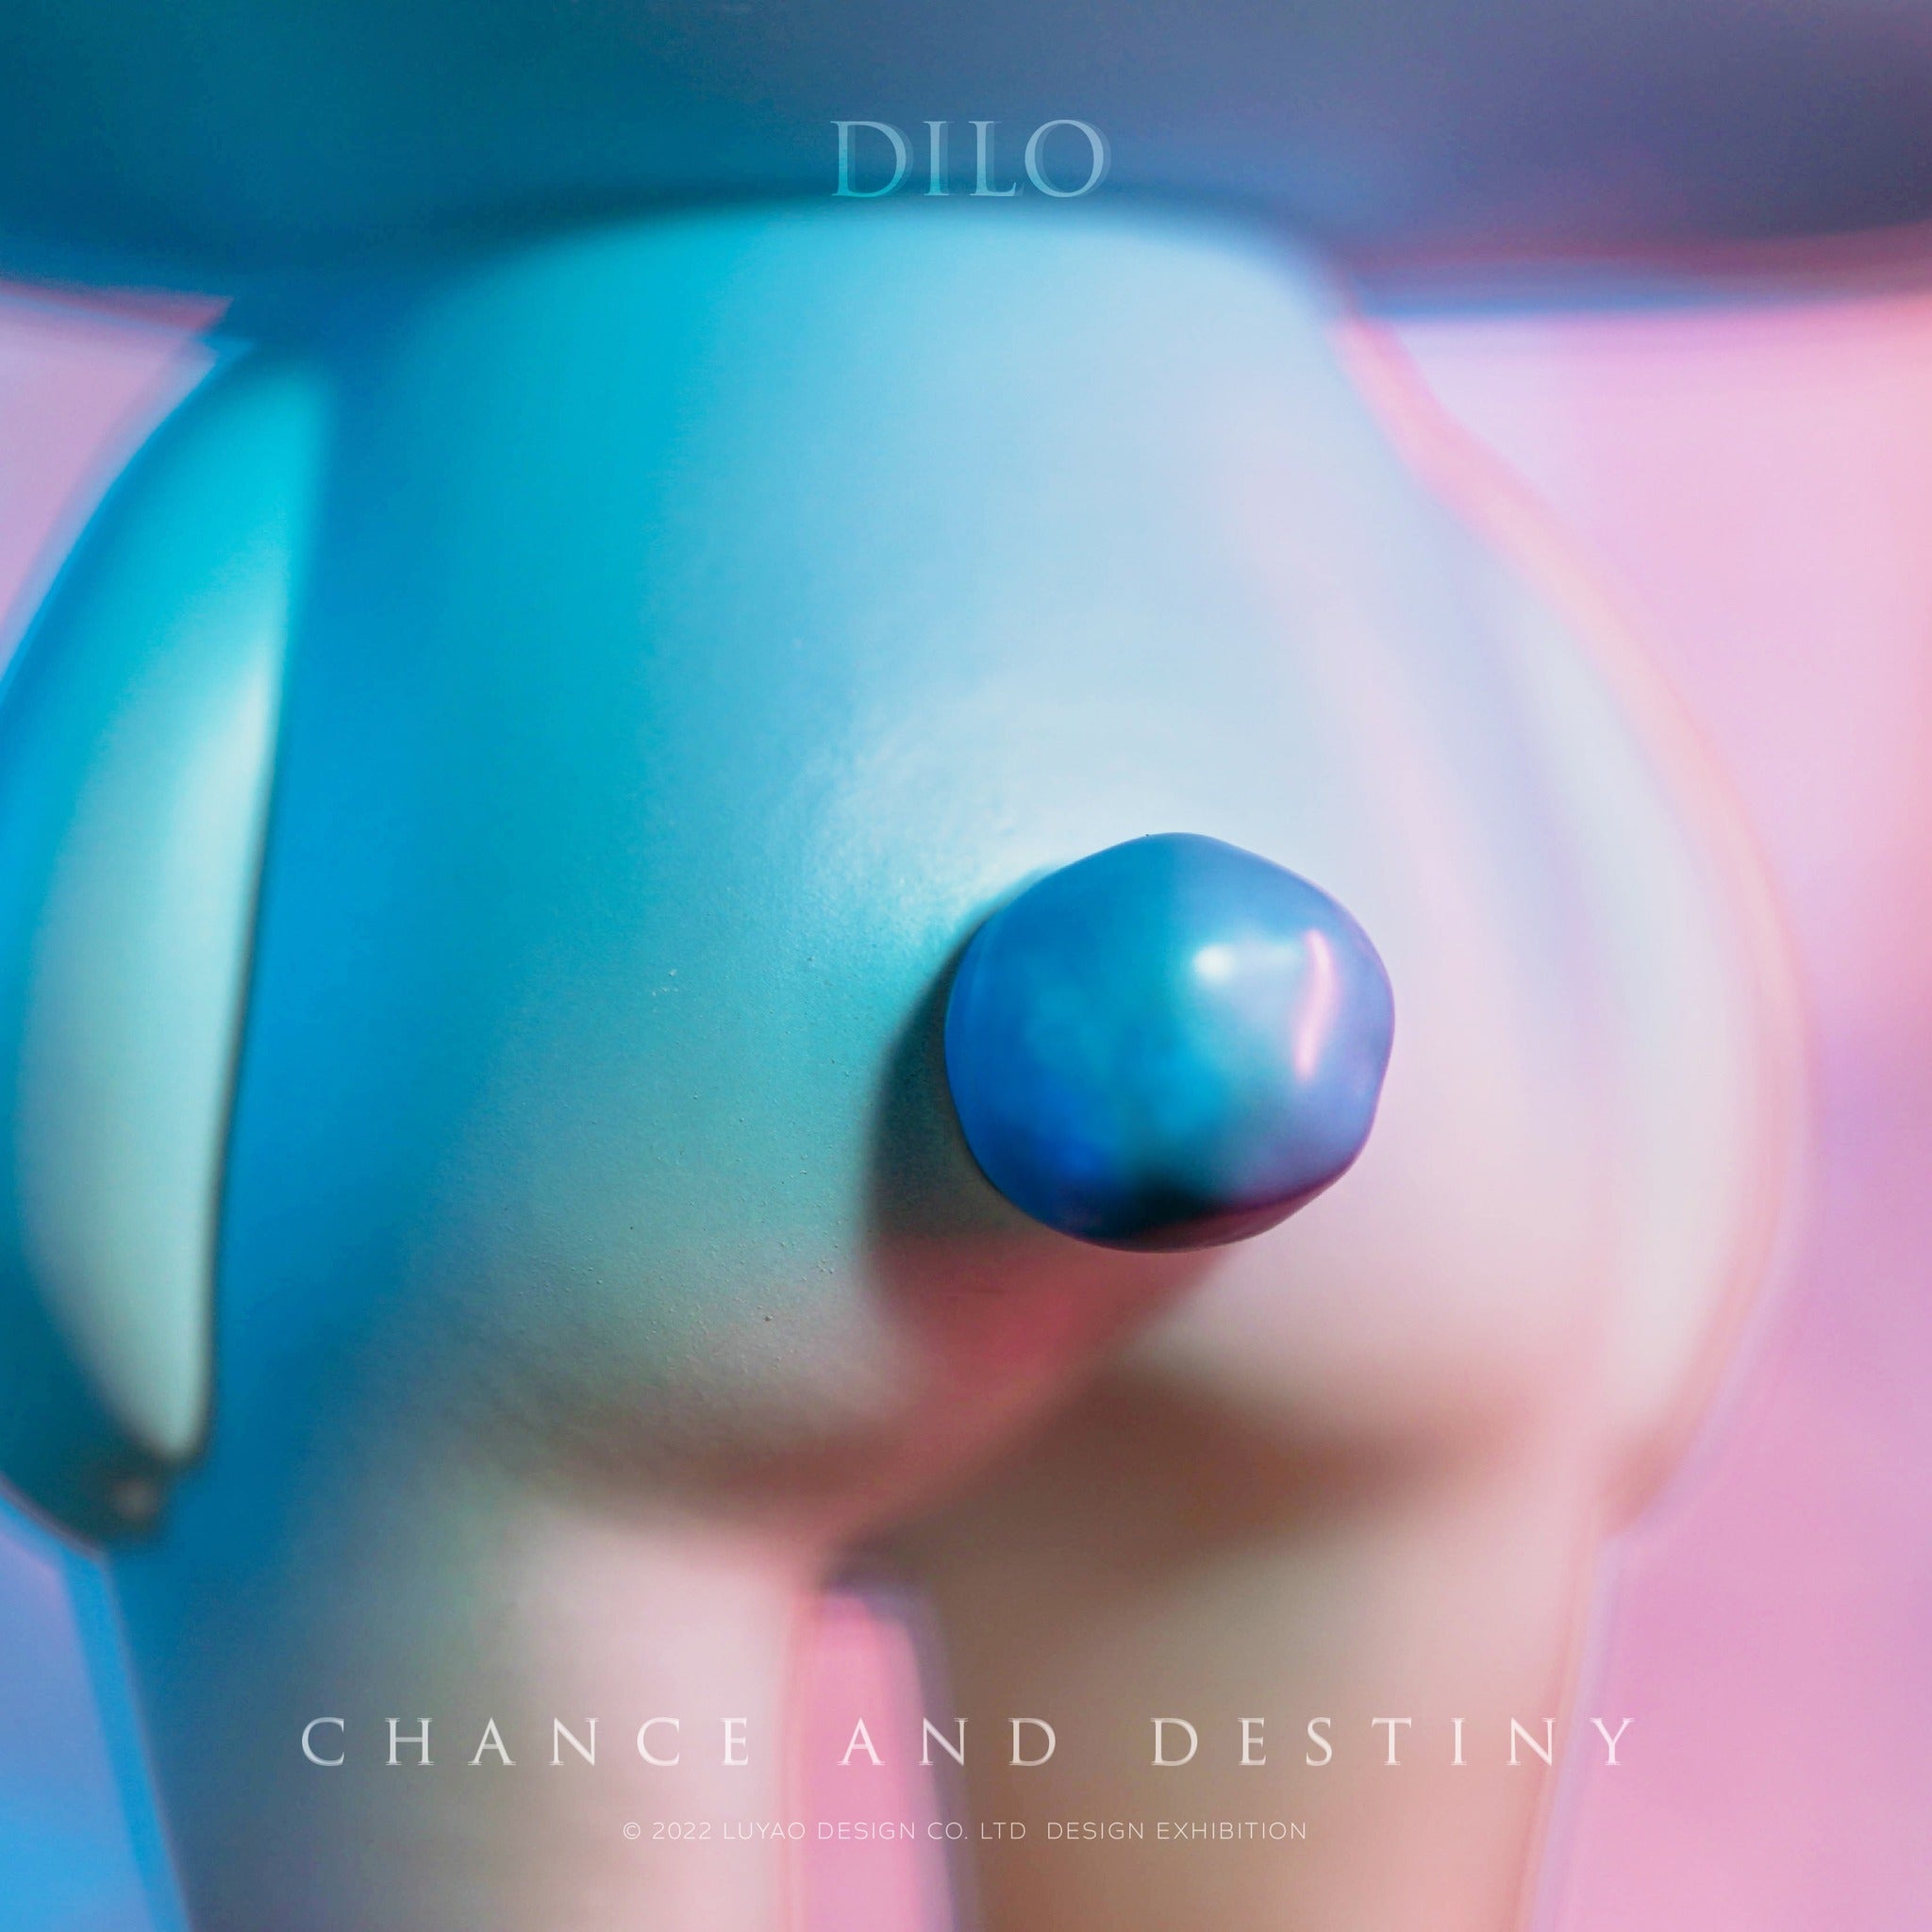 DILO-Chance and Destiny